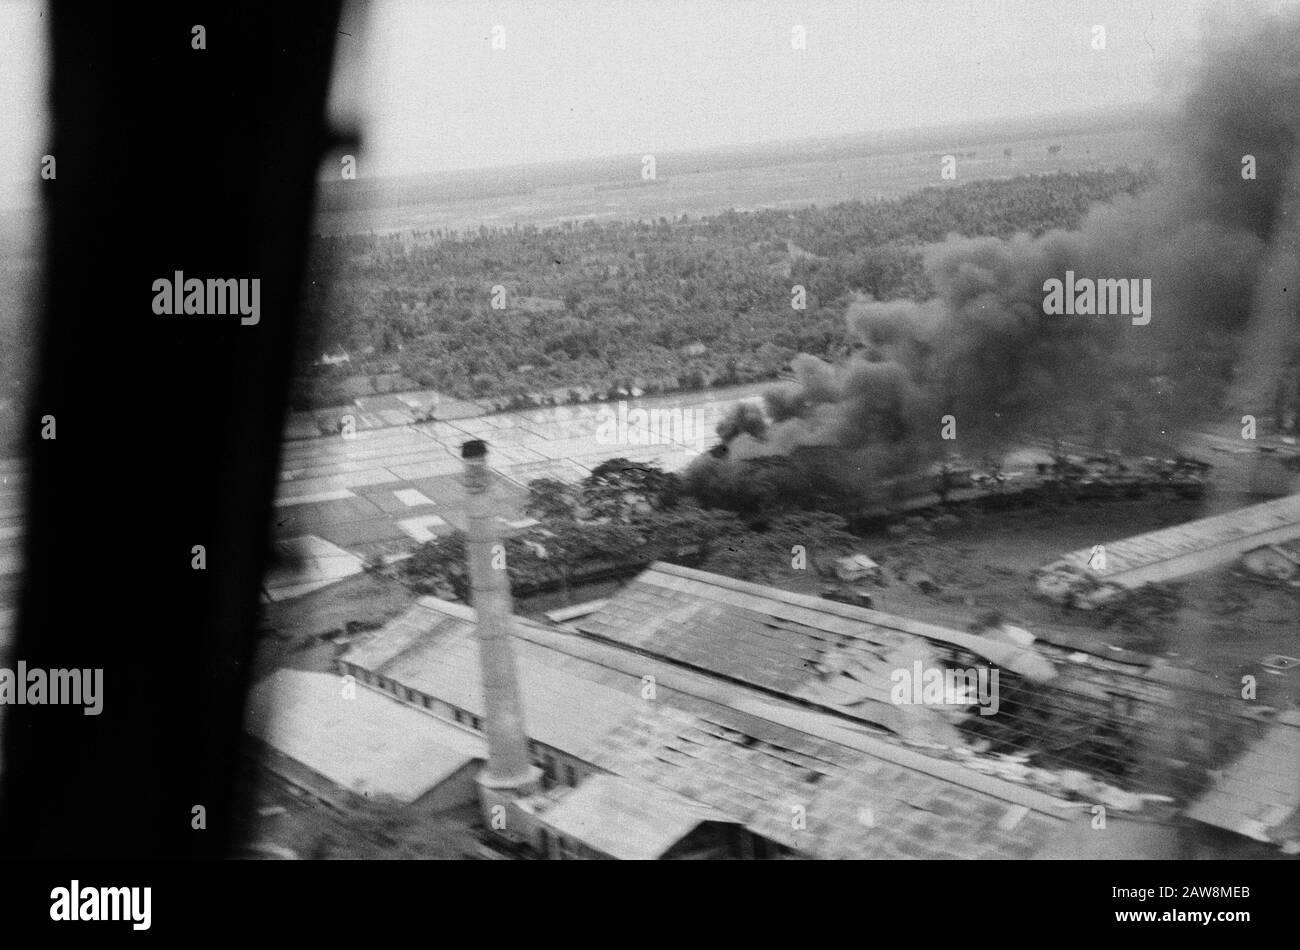 Food et al dropping infantry [2nd Police Action in December 1948]  [Luchtopname. Factory Complex with rice fields. Visible are vandalism. A building is on fire] Date: December 1948 Location: Indonesia Dutch East Indies Stock Photo